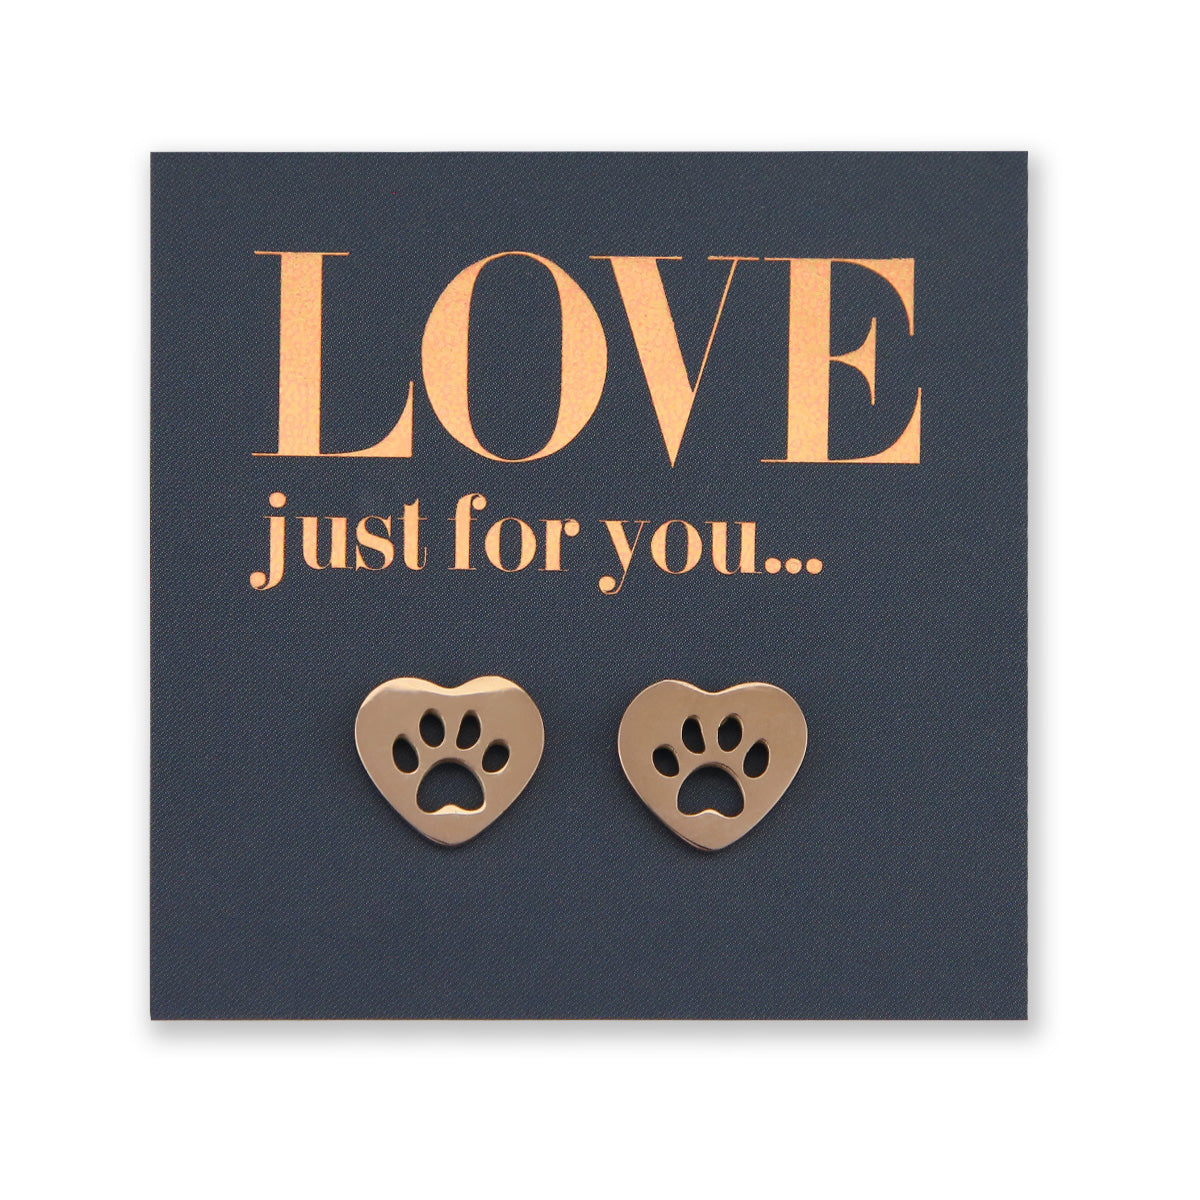 Stainless Steel Earring Studs - Love Just For You - HEART PAW PRINTS